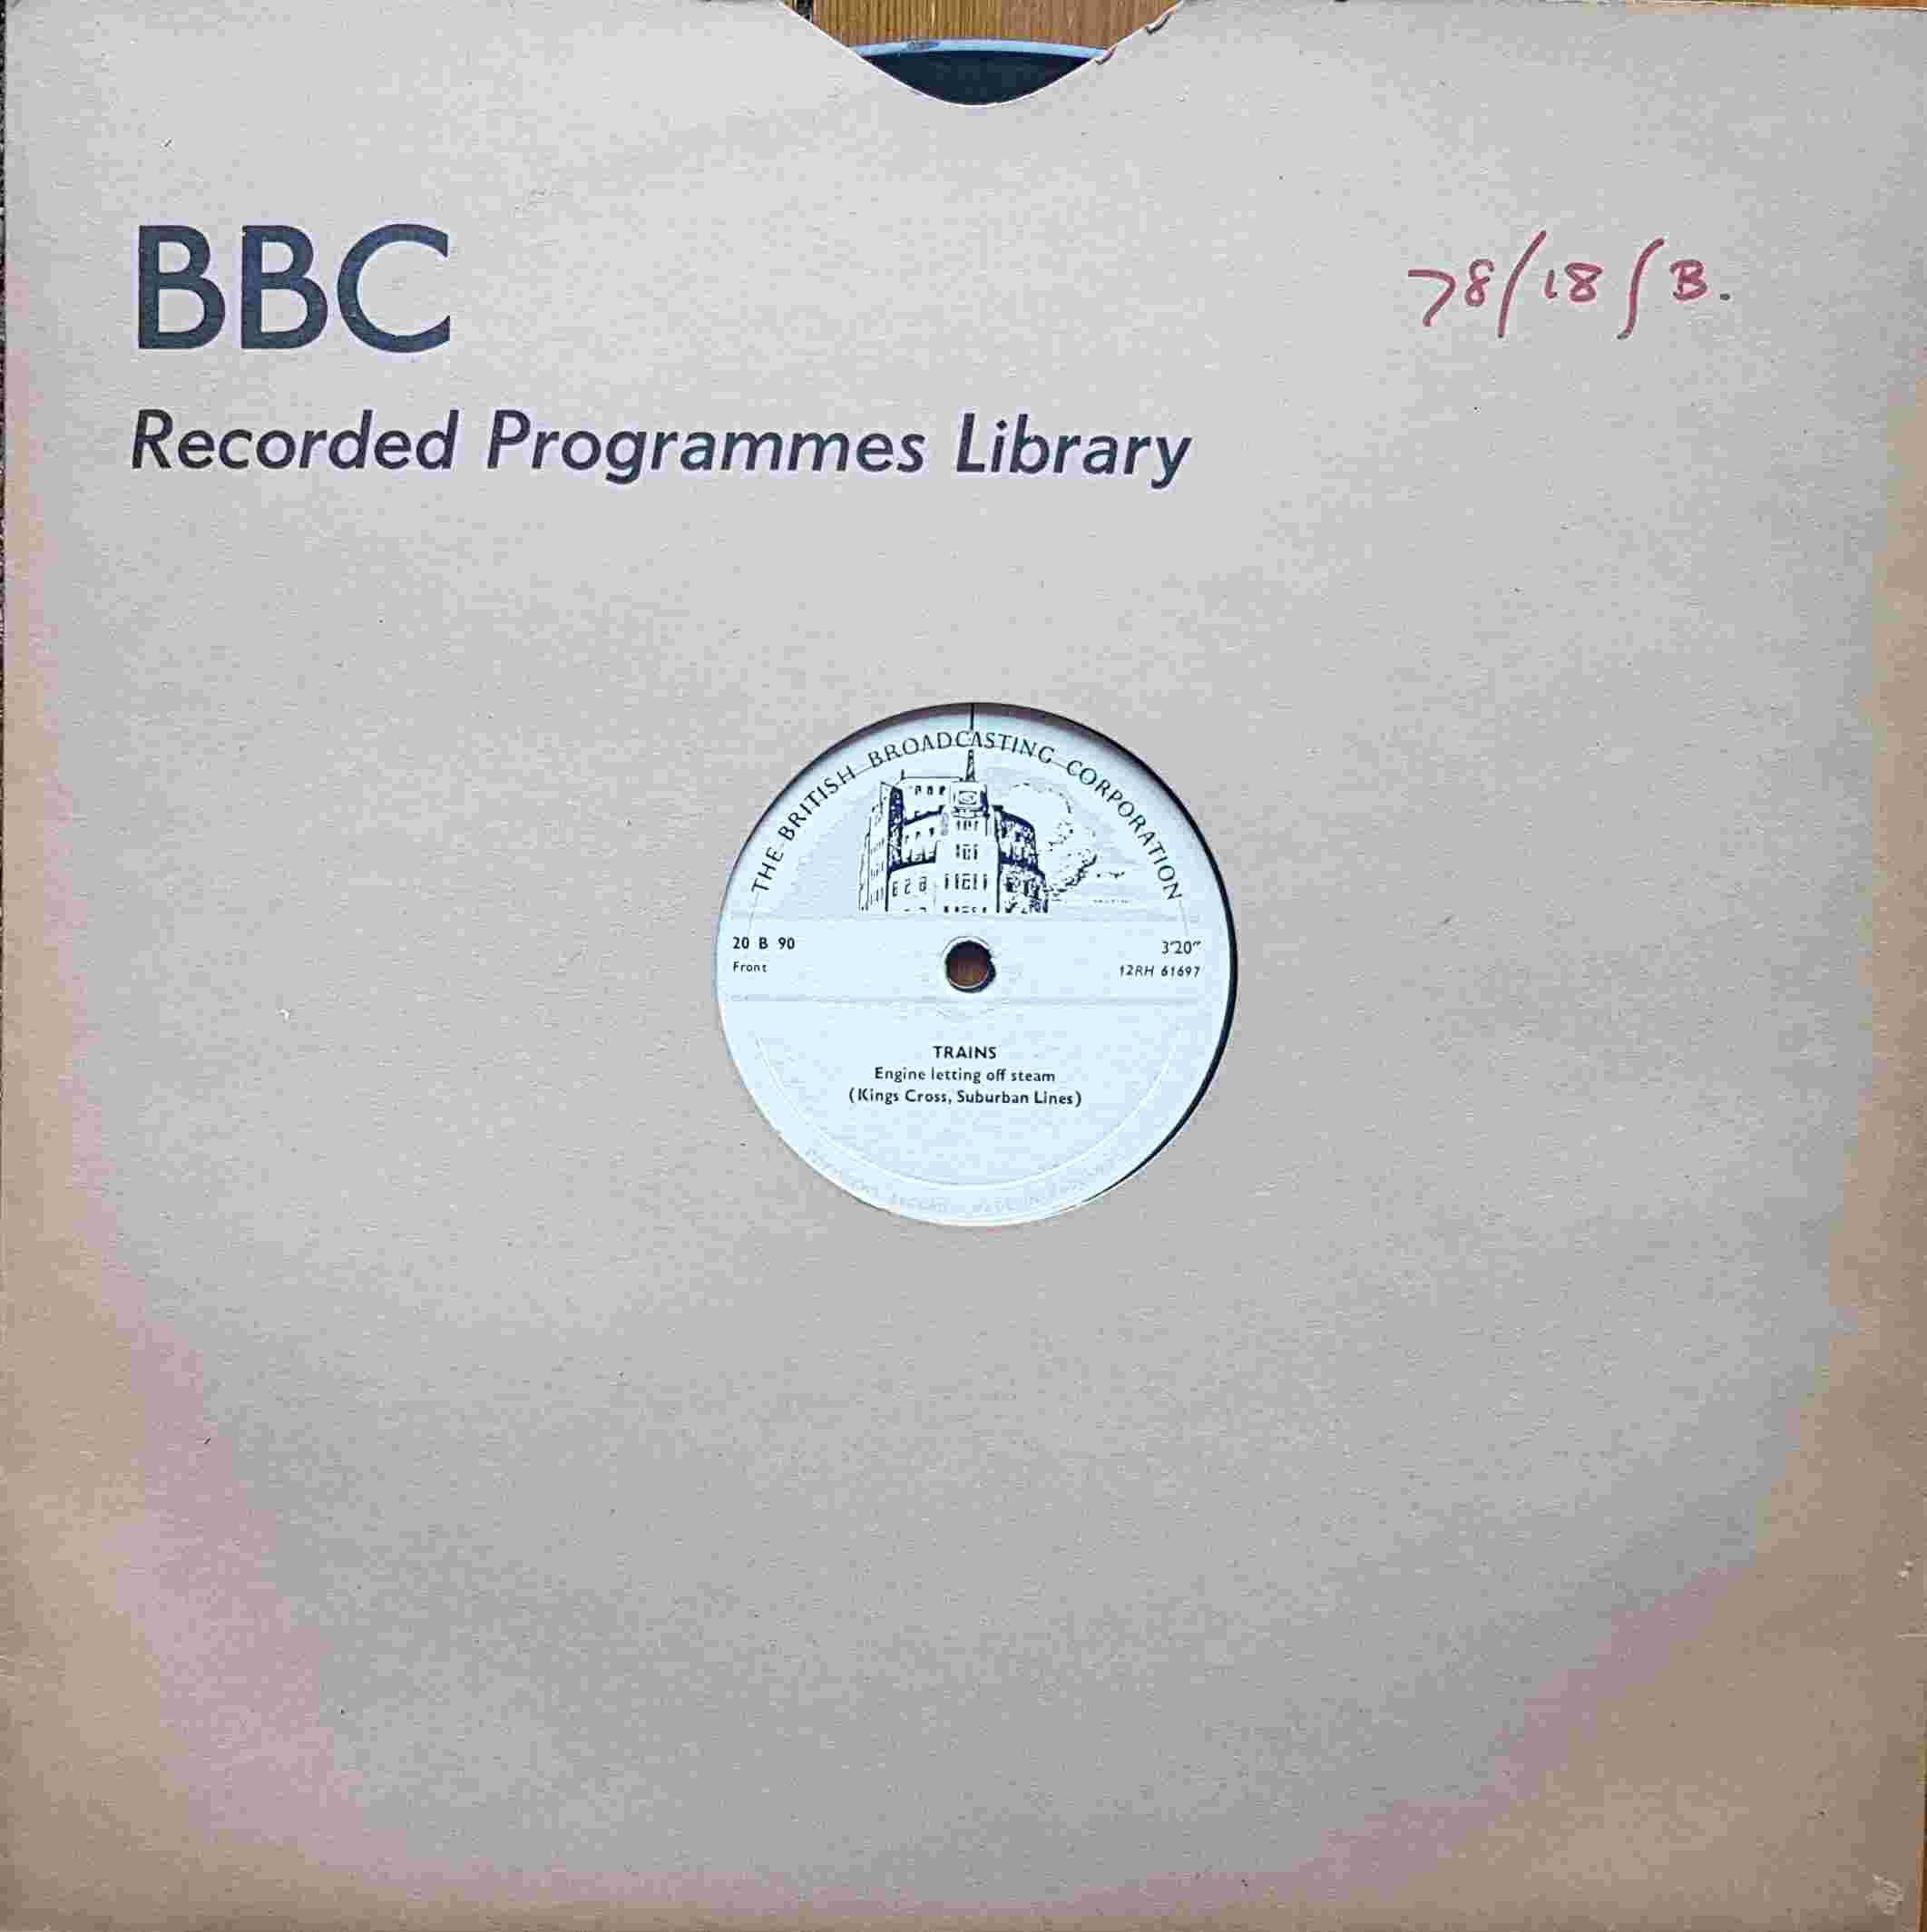 Picture of 20 B 90 Trains by artist Not registered from the BBC 78 - Records and Tapes library